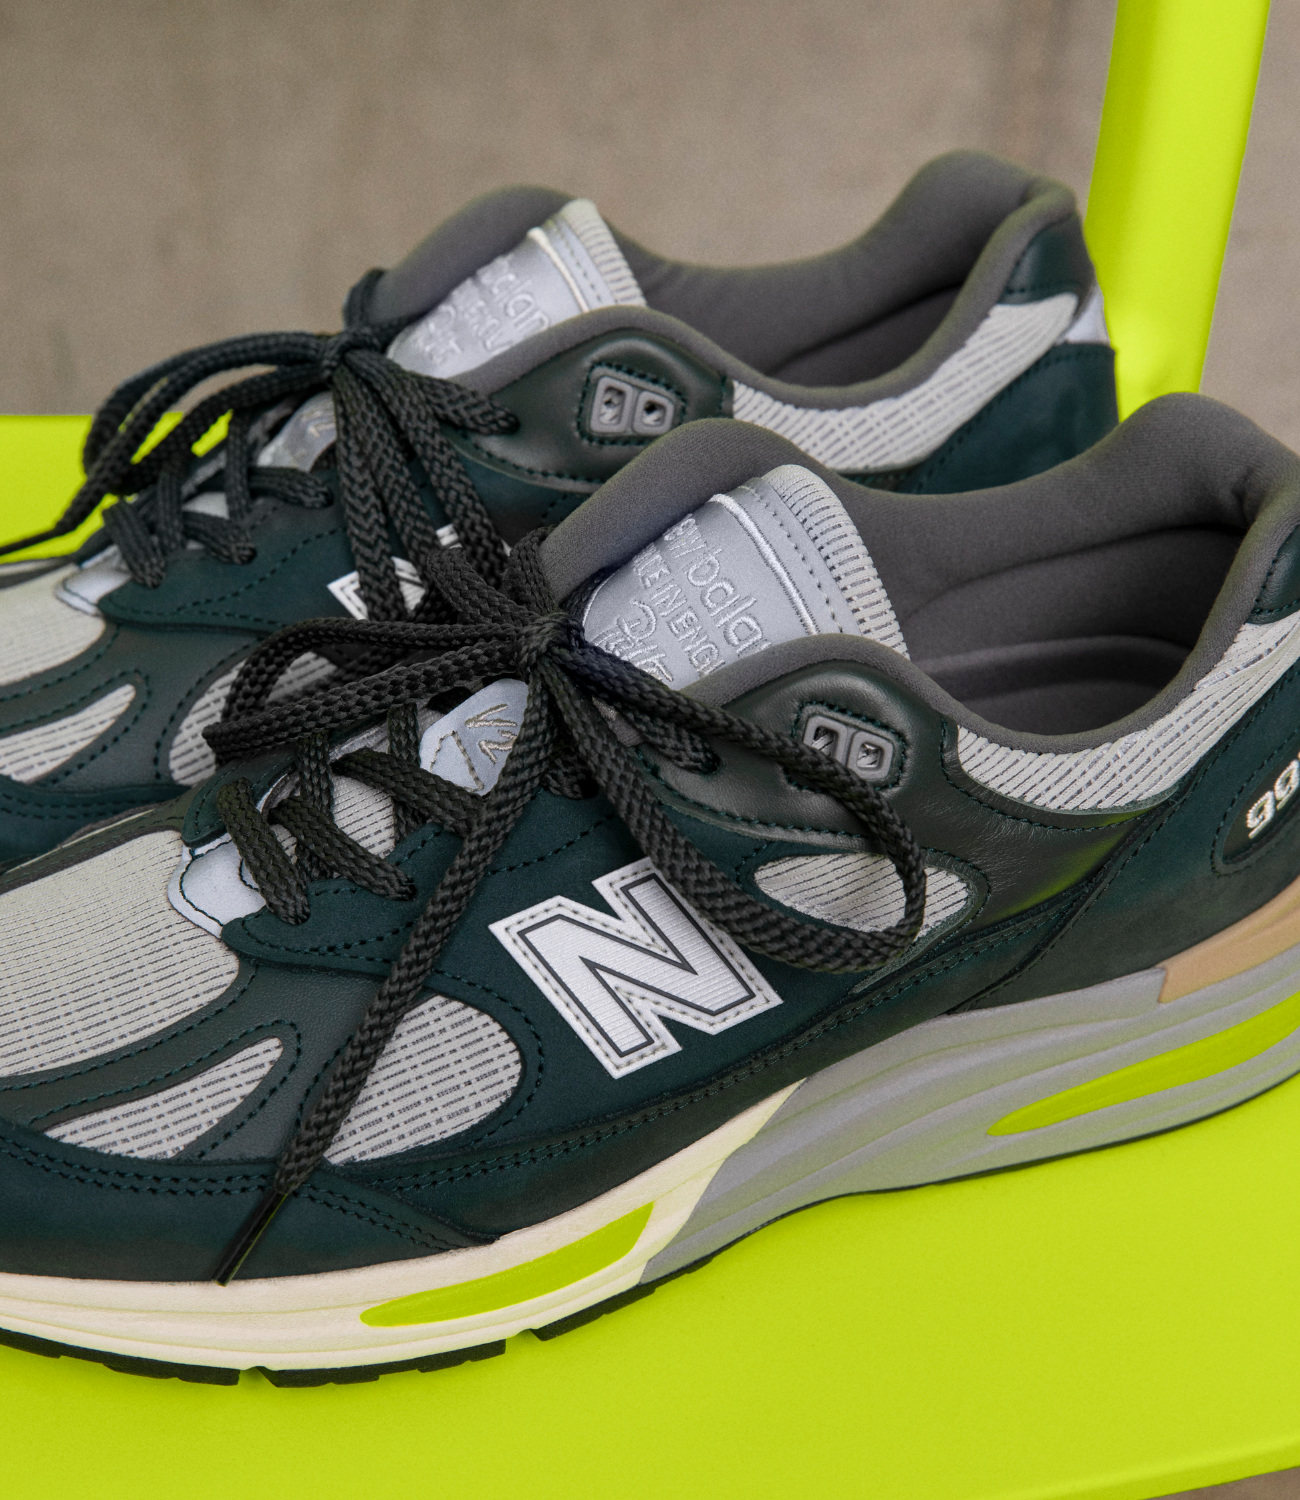 Patta & New Balance have reunited for Fall/Winter 2023 for two deliciously colorful takes on the latter's techy 991v2 silhouette.